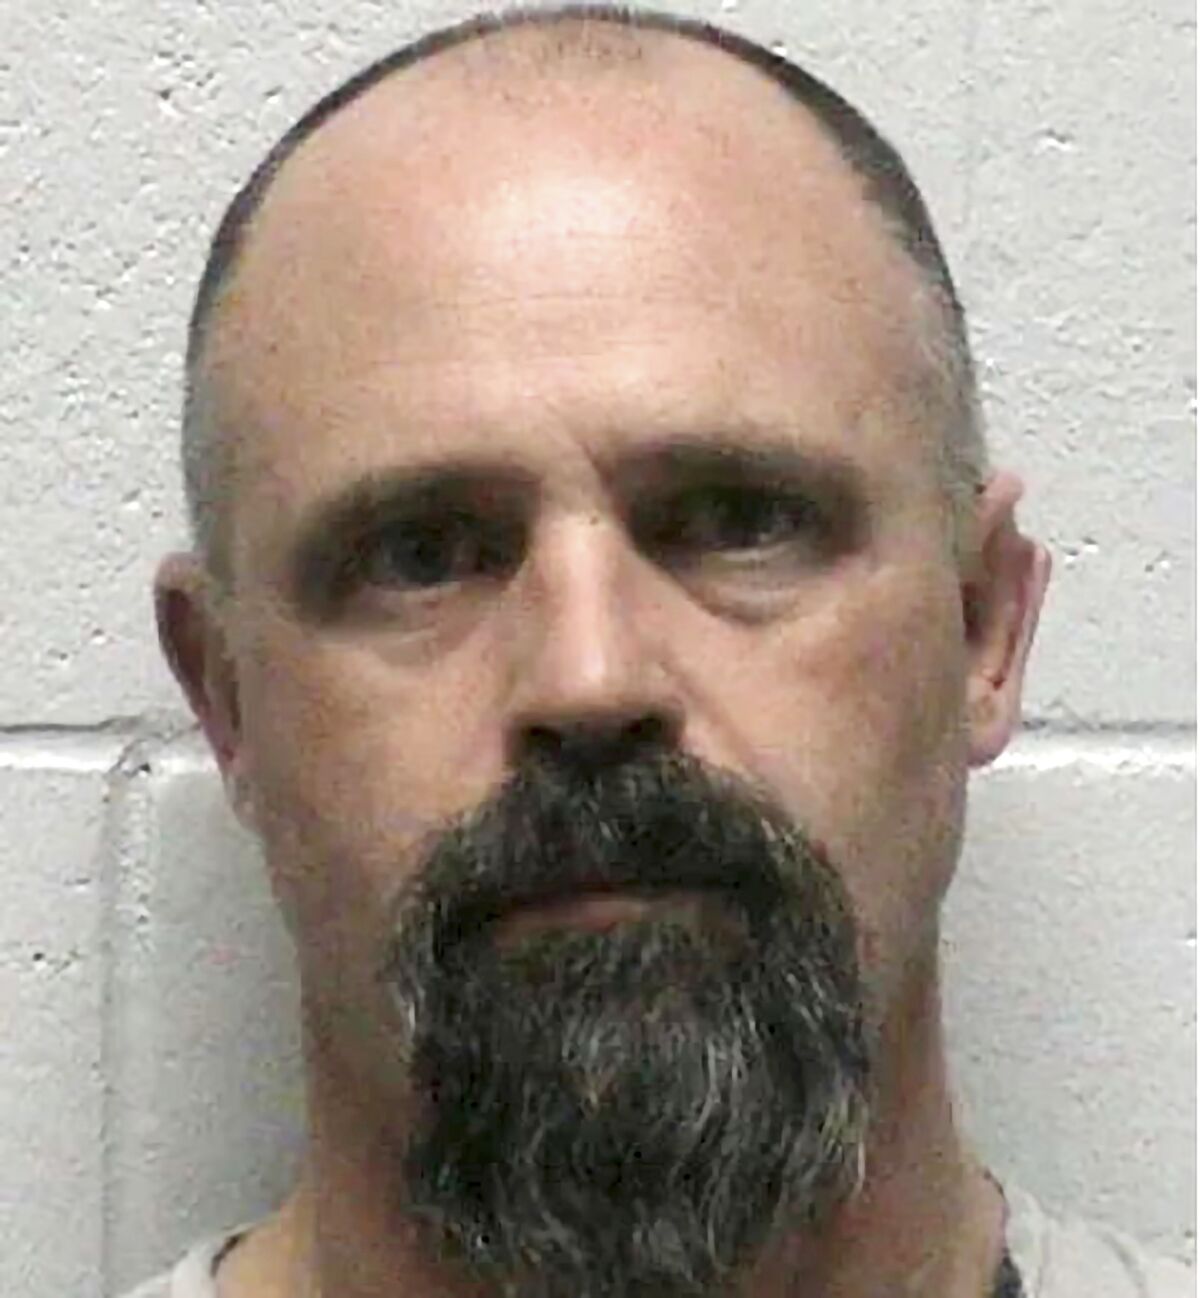 FILE - This photo provided by Lyon County Detention Center shows Troy Driver, of Fallon, Nev., following his arrest Friday, March 25, 2022. Prosecutors say Driver, accused of kidnapping and killing 18-year-old Naomi Irion, abducted her in Fernley before he fatally shot her and buried her body in a remote high-desert area in rural northern Nevada. Lyon County District Attorney Stephen Rye filed an amended criminal complaint Tuesday, April 5, 2022, adding first-degree murder and other crimes to the kidnapping charge already facing Driver. (Lyon County Sheriff's Office via AP, File)